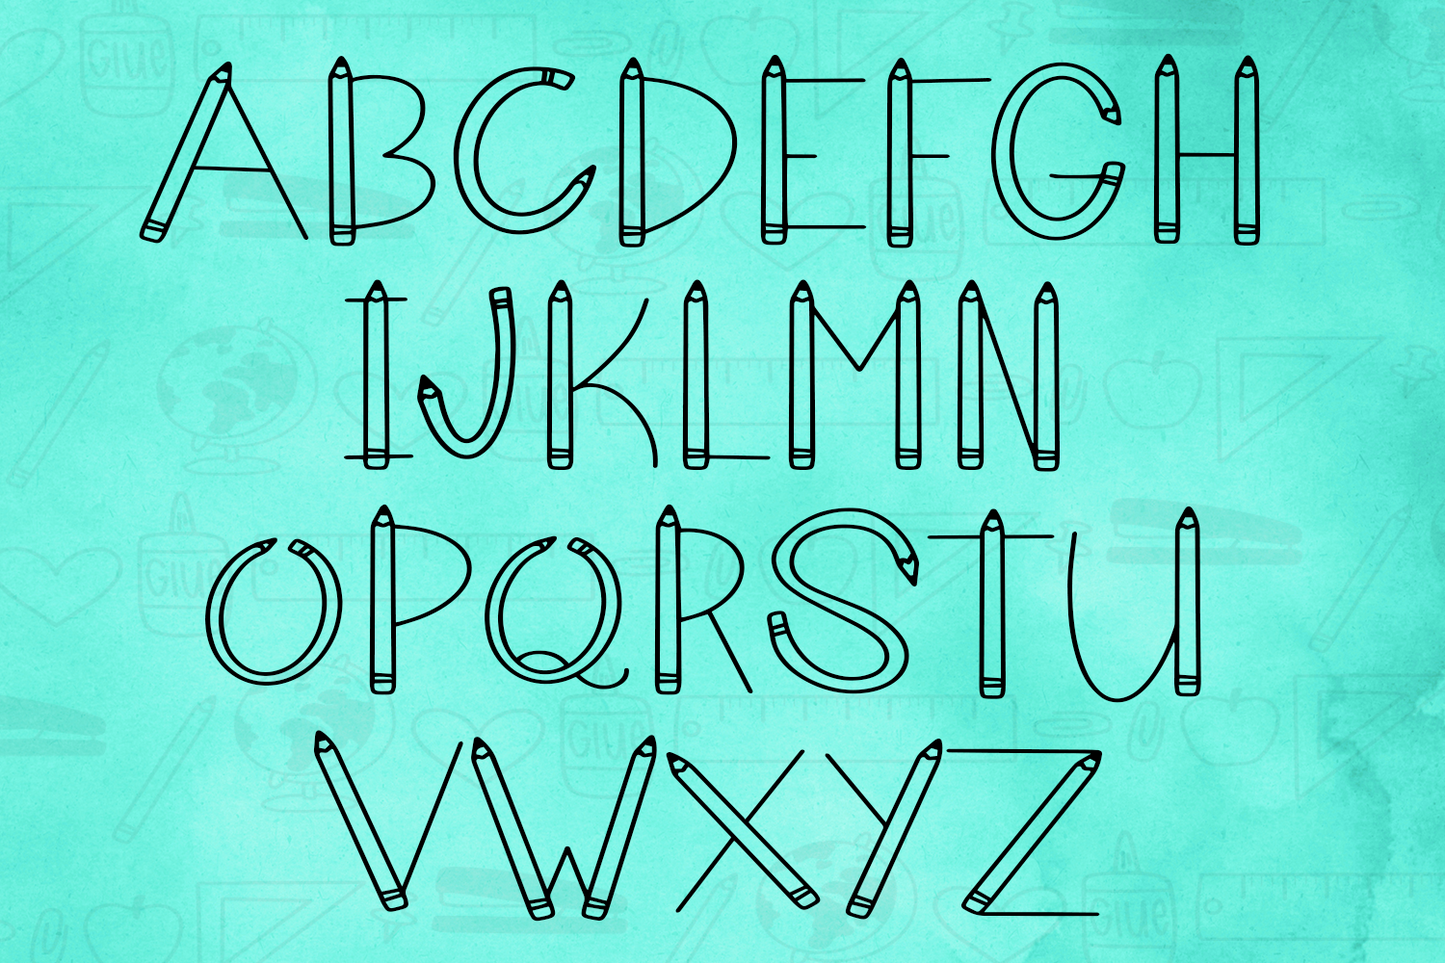 Pencil Point - A Font With Doodles